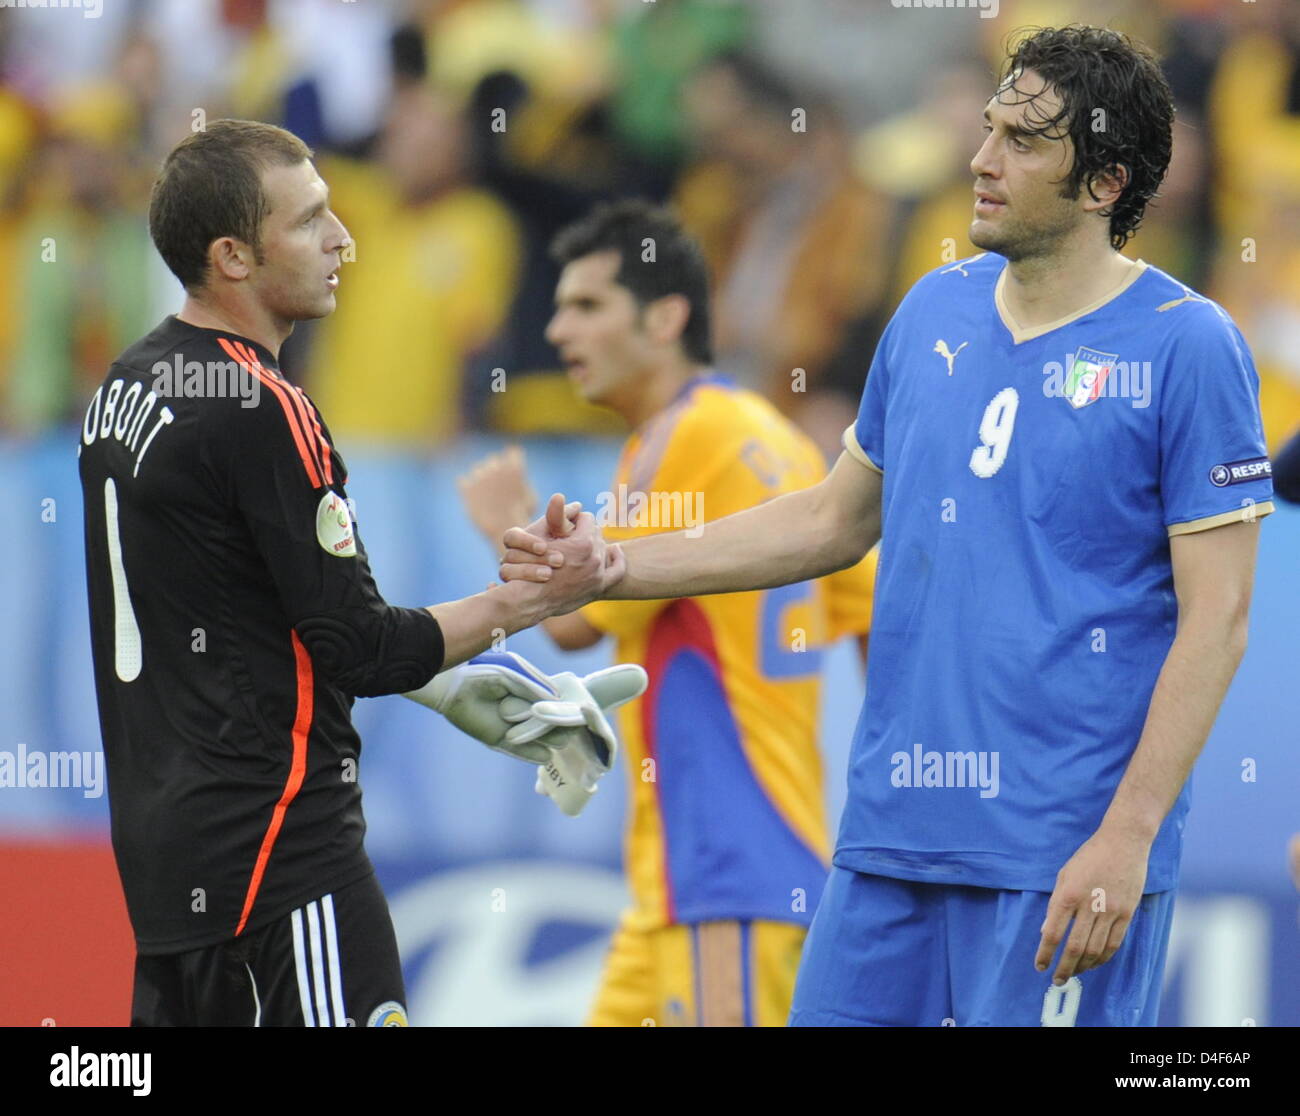 Luca Toni of Italy (R) congratulates goalkeeper Bogdan Lobont (L) of Romania after the UEFA EURO 2008 Group C preliminary round match between Italy and Romania at the Letzigrund stadium in Zurich, Switzerland, 13 June 2008. The match ended 1-1 draw. Photo: Peter Kneffel dpa +please note UEFA restrictions particulary in regard to slide shows and 'No Mobile Services'+ +++(c) dpa - Bi Stock Photo